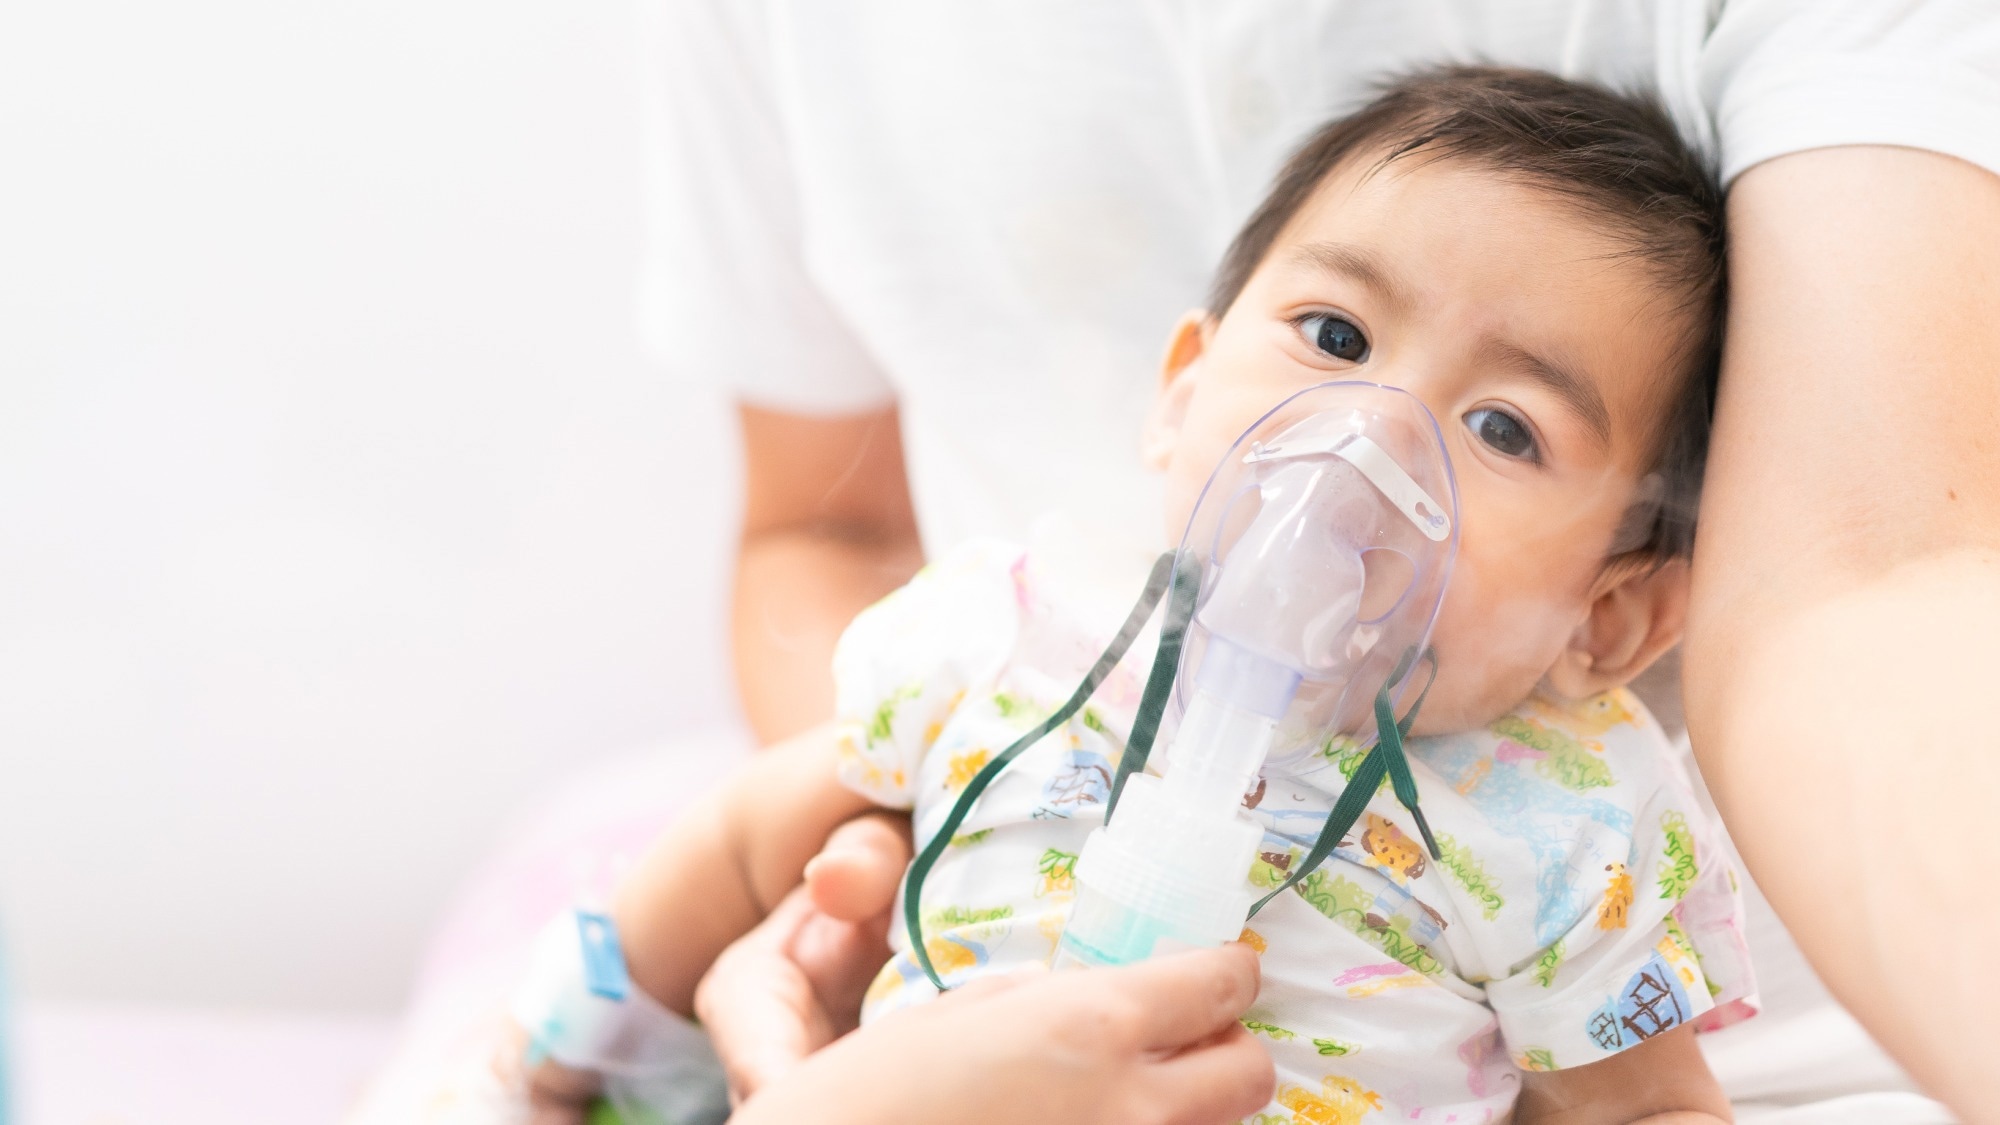 Study: Defining the Burden of Disease of RSV in Europe: estimates of RSV-associated hospitalisations in children under 5 years of age. A systematic review and modelling study. Image Credit: SUKJAI PHOTO / Shutterstock